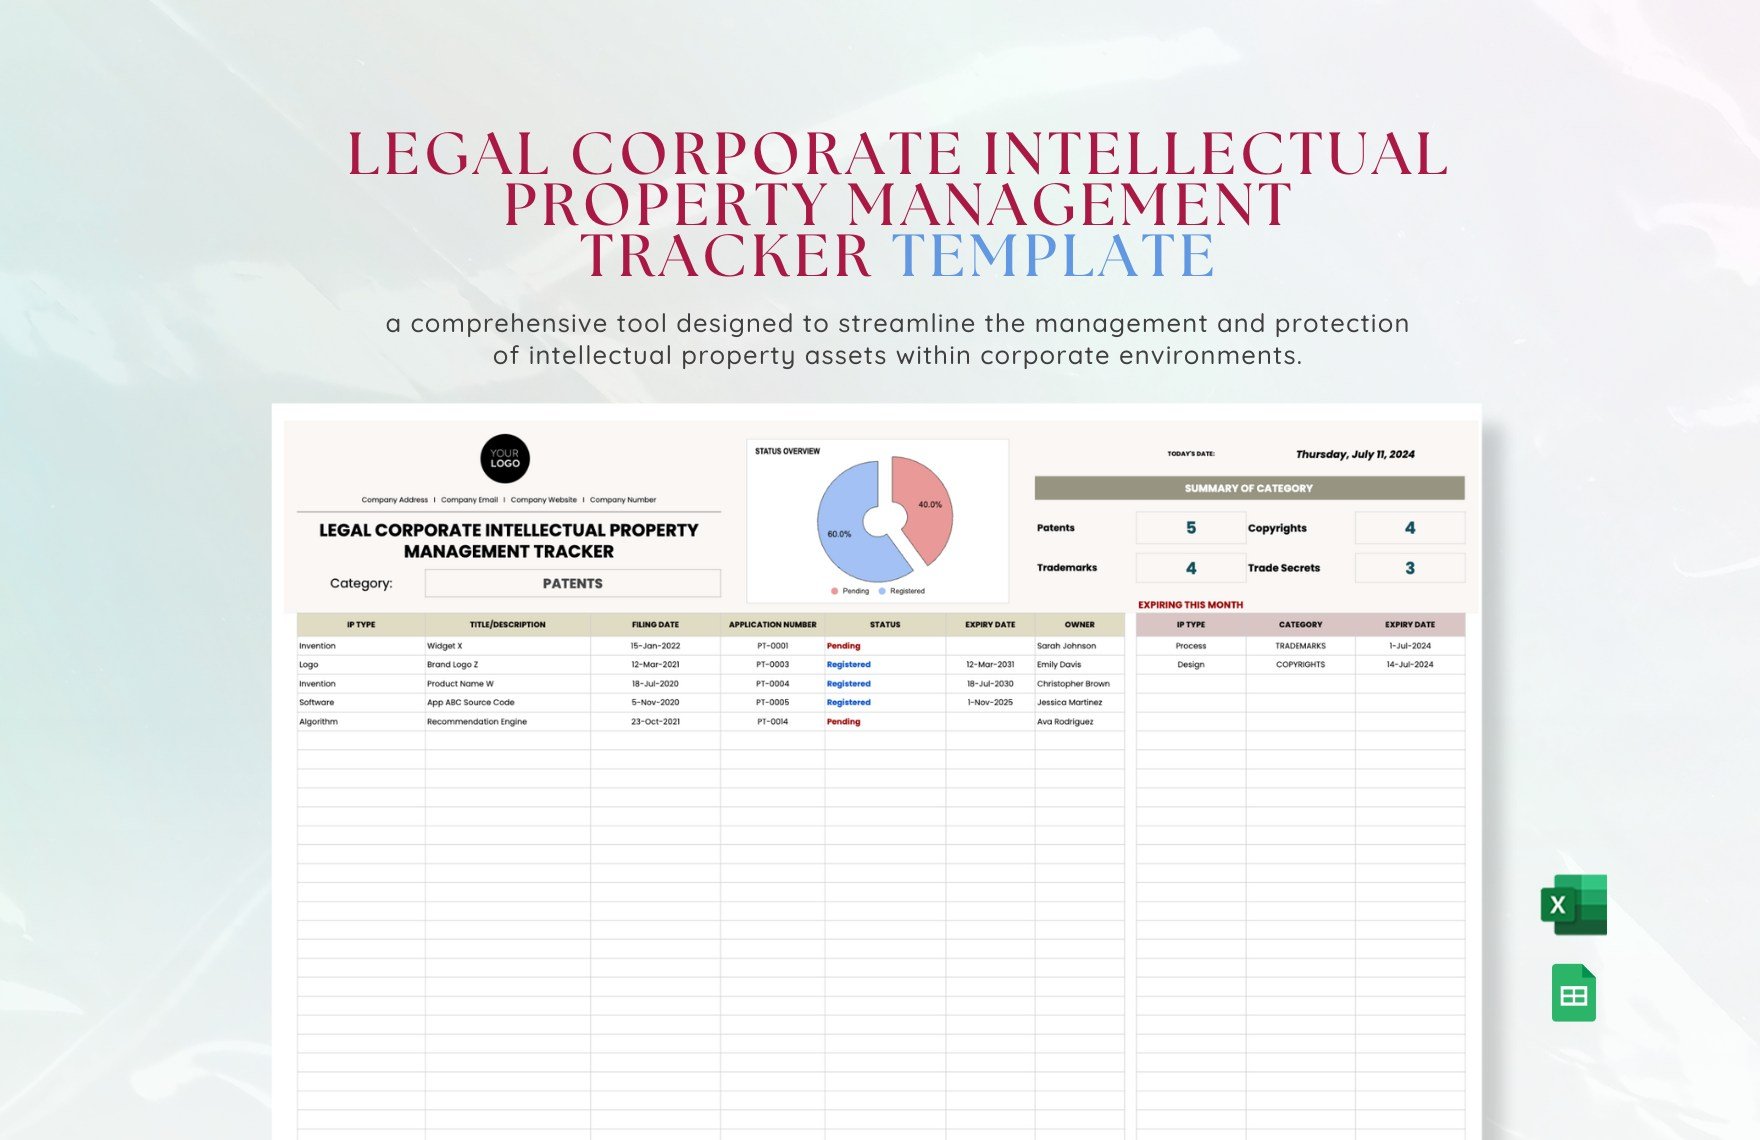 Legal Corporate Intellectual Property Management Tracker Template in Excel, Google Sheets